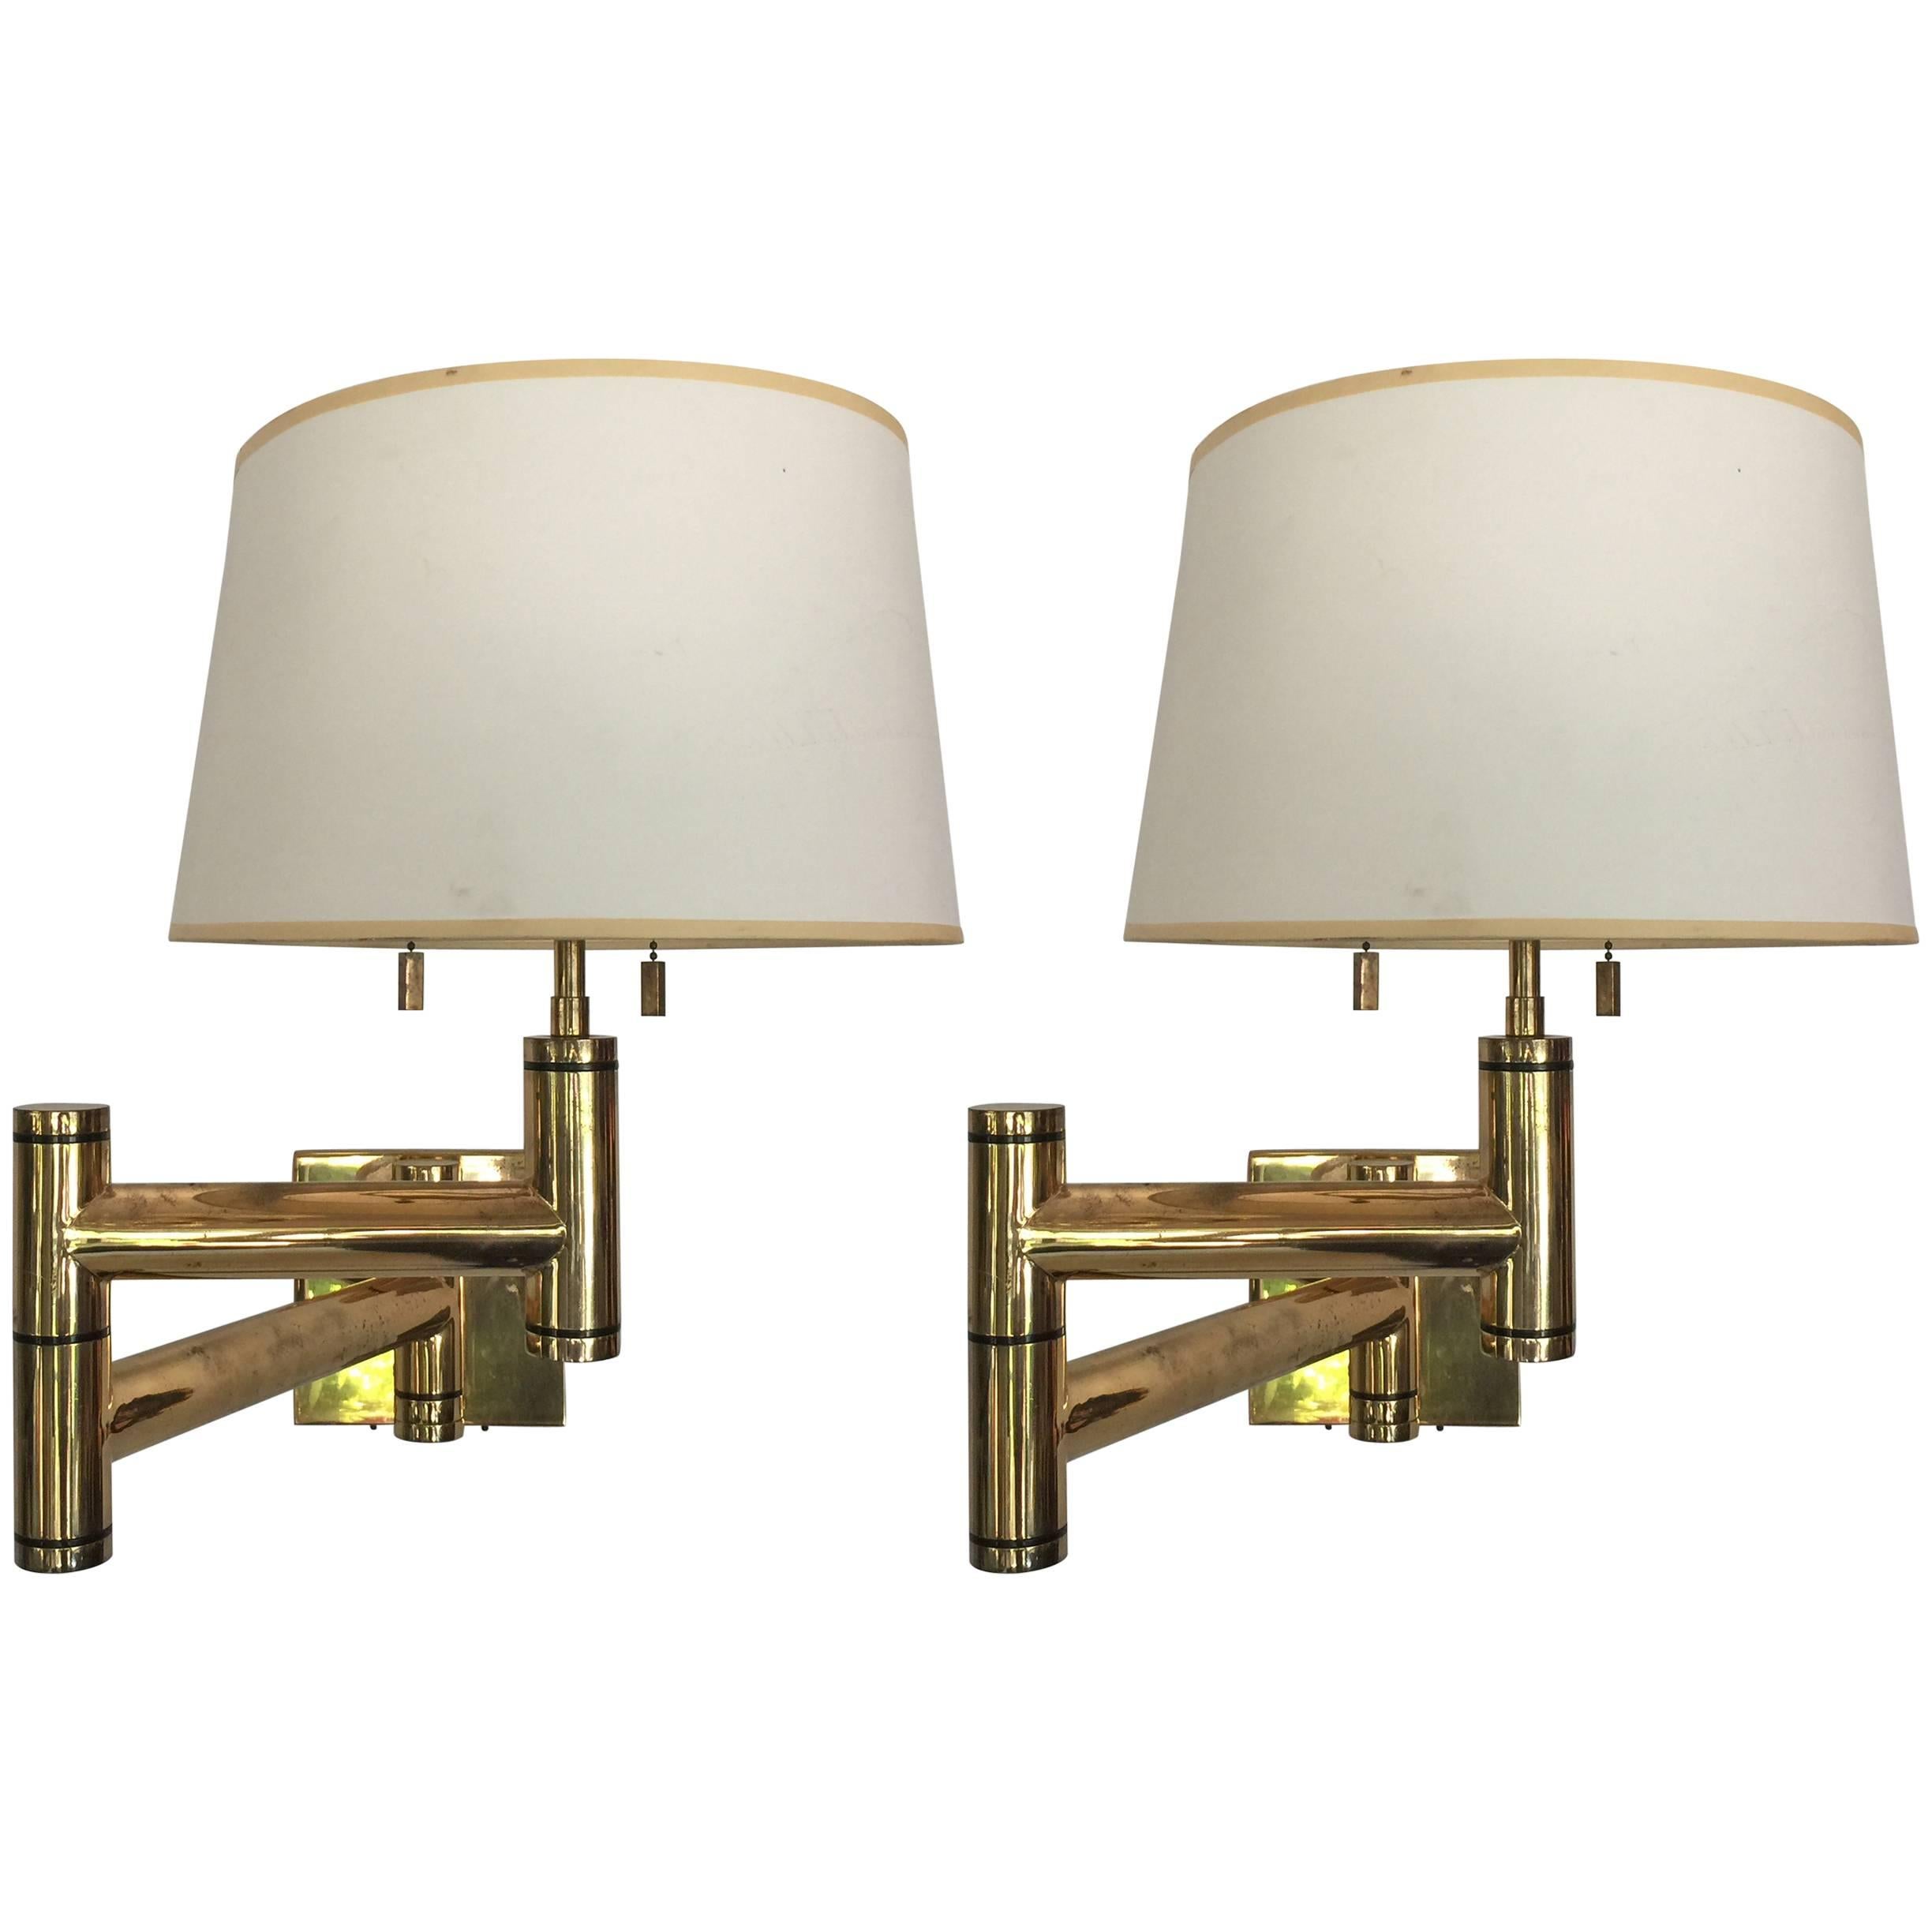 Pair of Karl Springer Swing Arm Wall Lamps in Heavy Brass